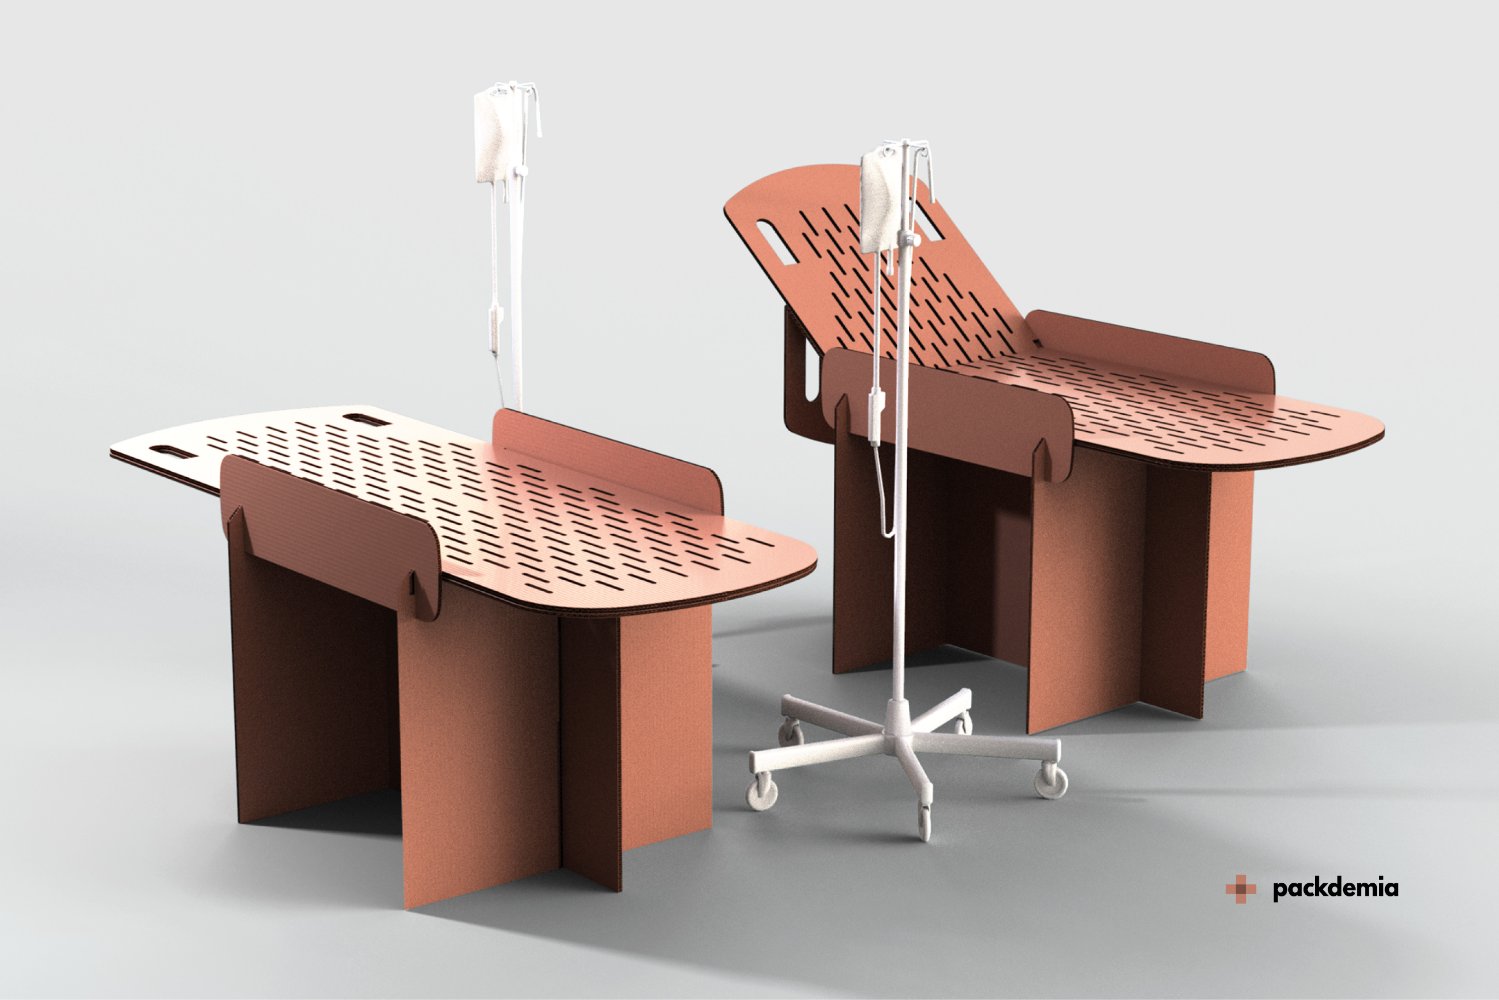 The World Needs These 1-Minute Cardboard Hospital Beds From #Packdemia